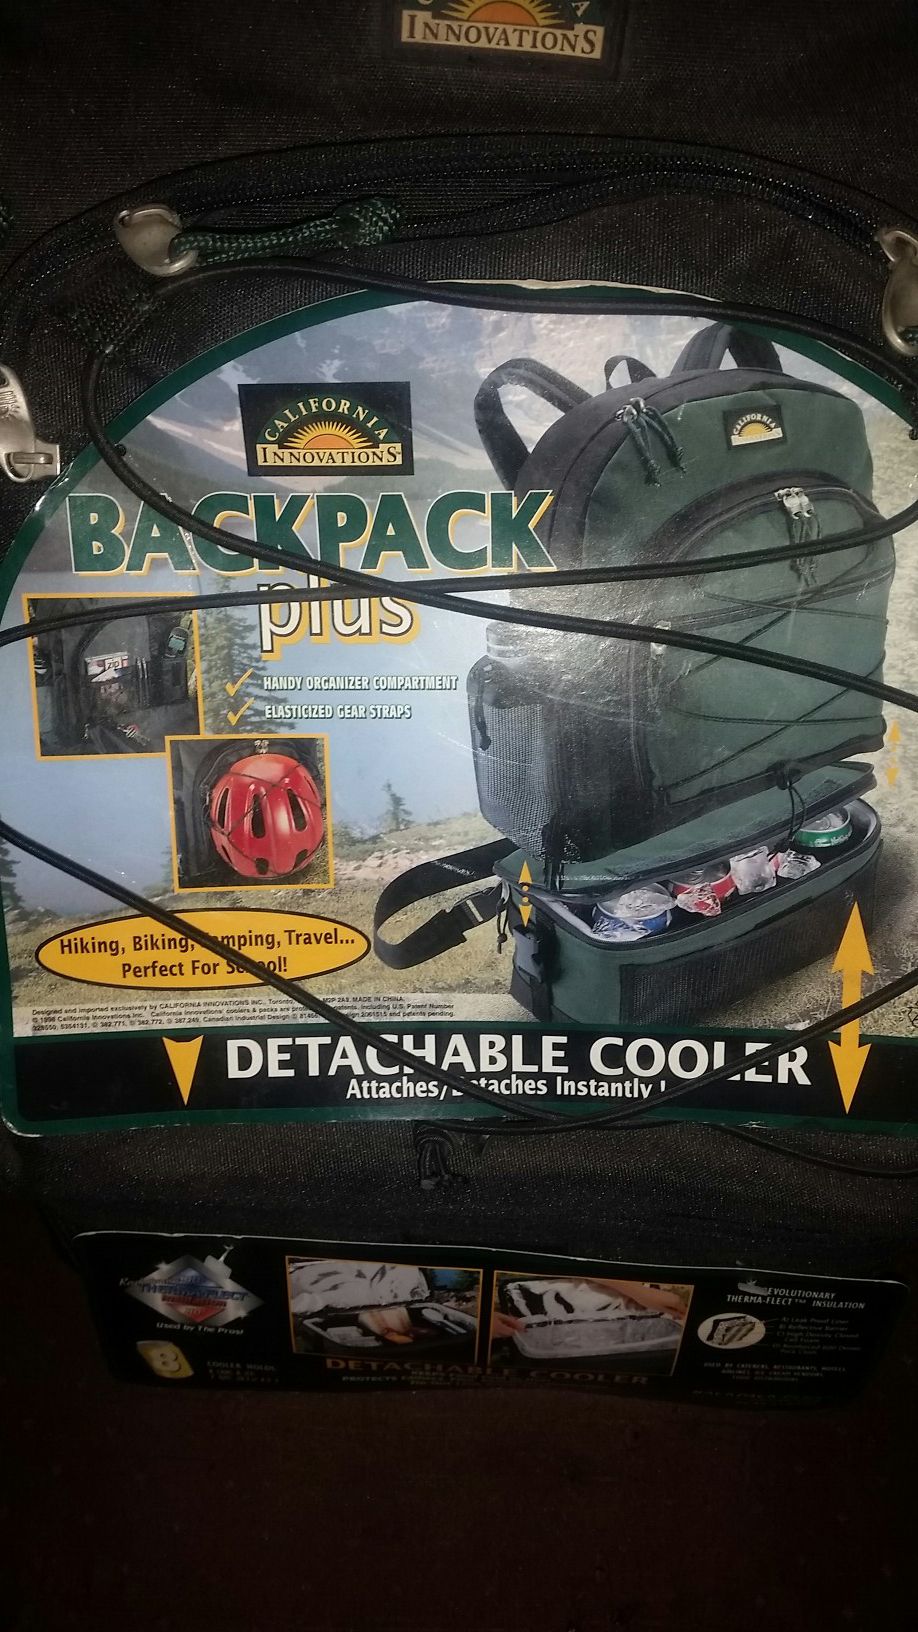 Brand new Backpack with detachable cooler